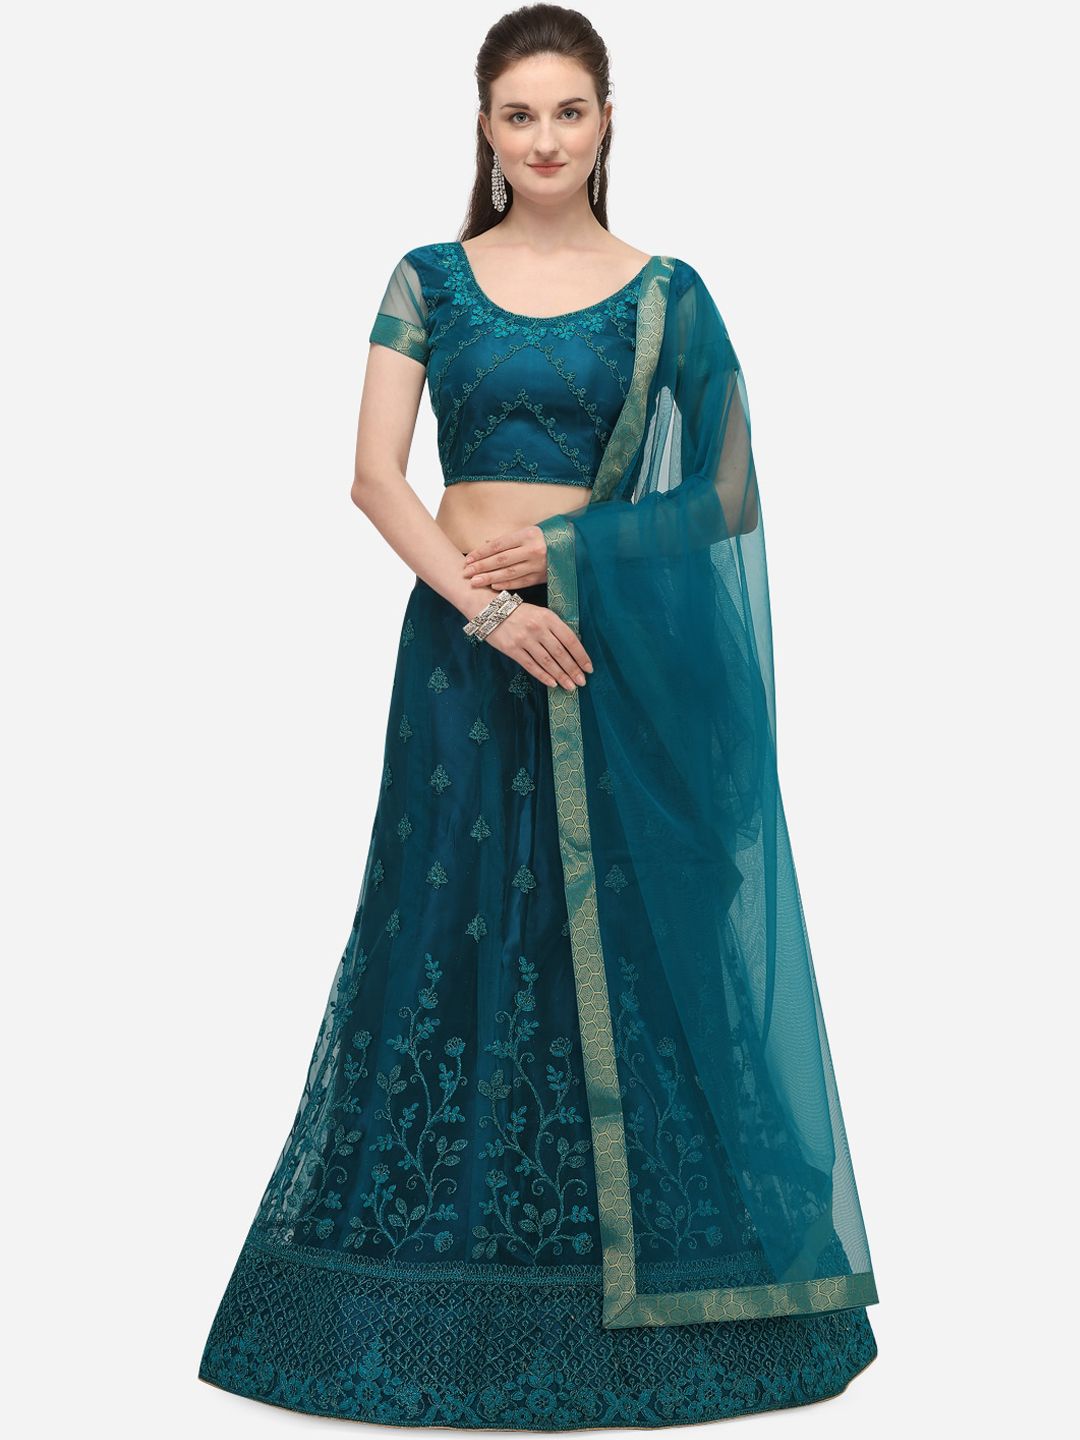 Netram Teal & Gold-Toned Embroidered Semi-Stitched Lehenga & Unstitched Blouse with Dupatta Price in India